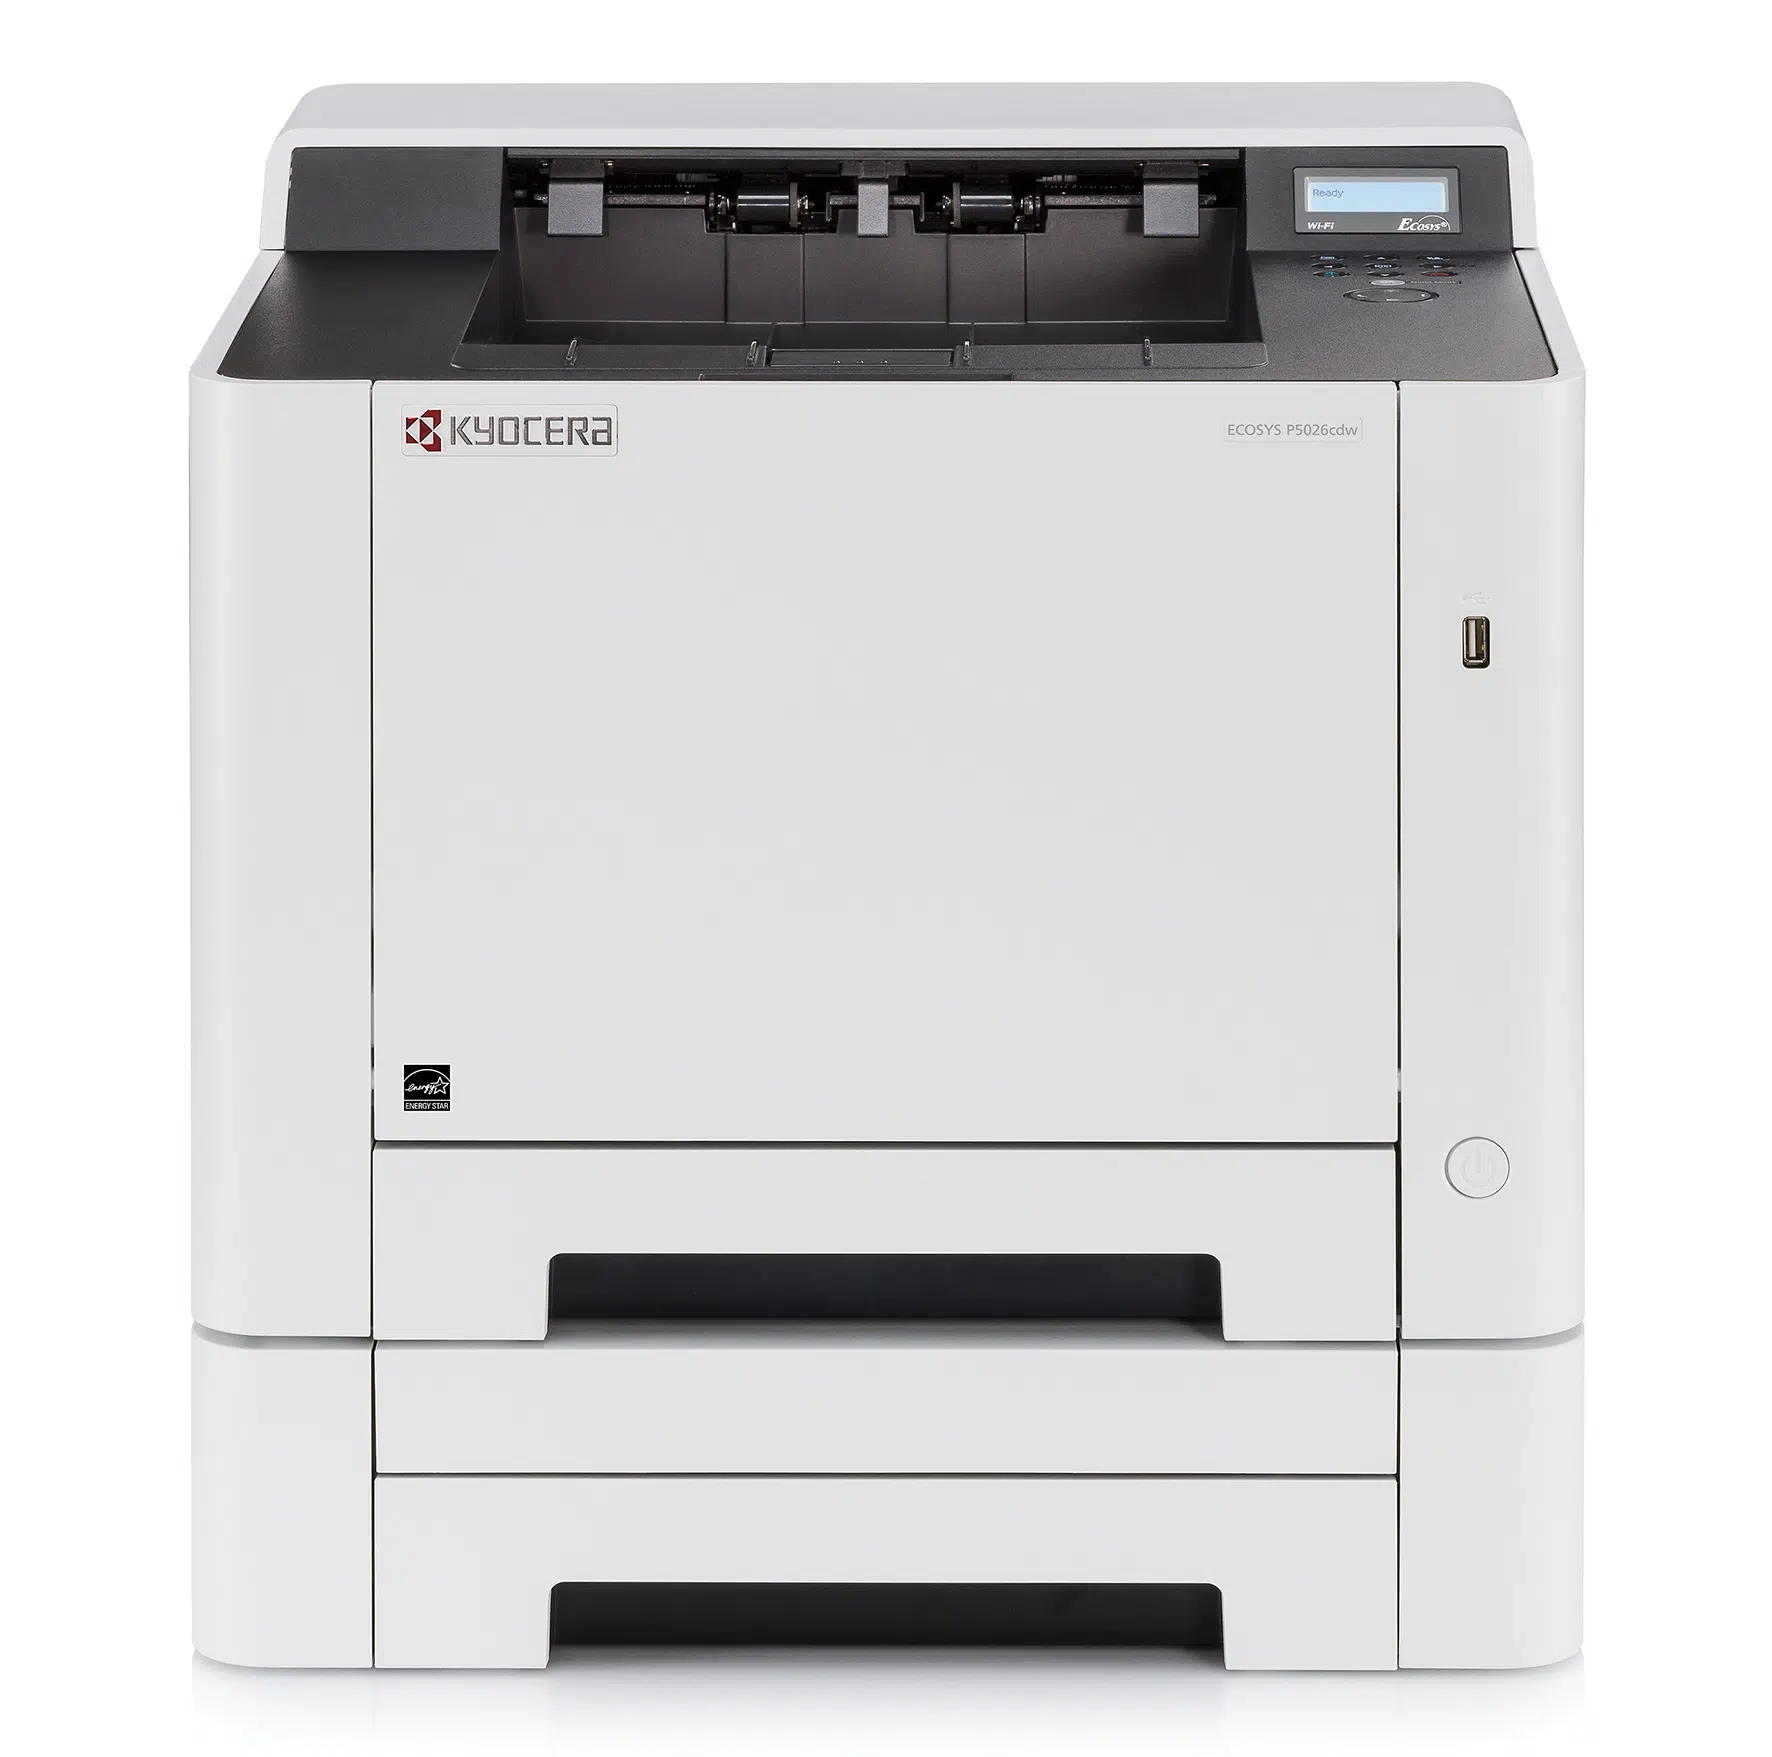 Kyocera ECOSYS P2040dw ECOSYS P2040dw ECOSYS P2040dw Printer For Sale & Lease in Houston